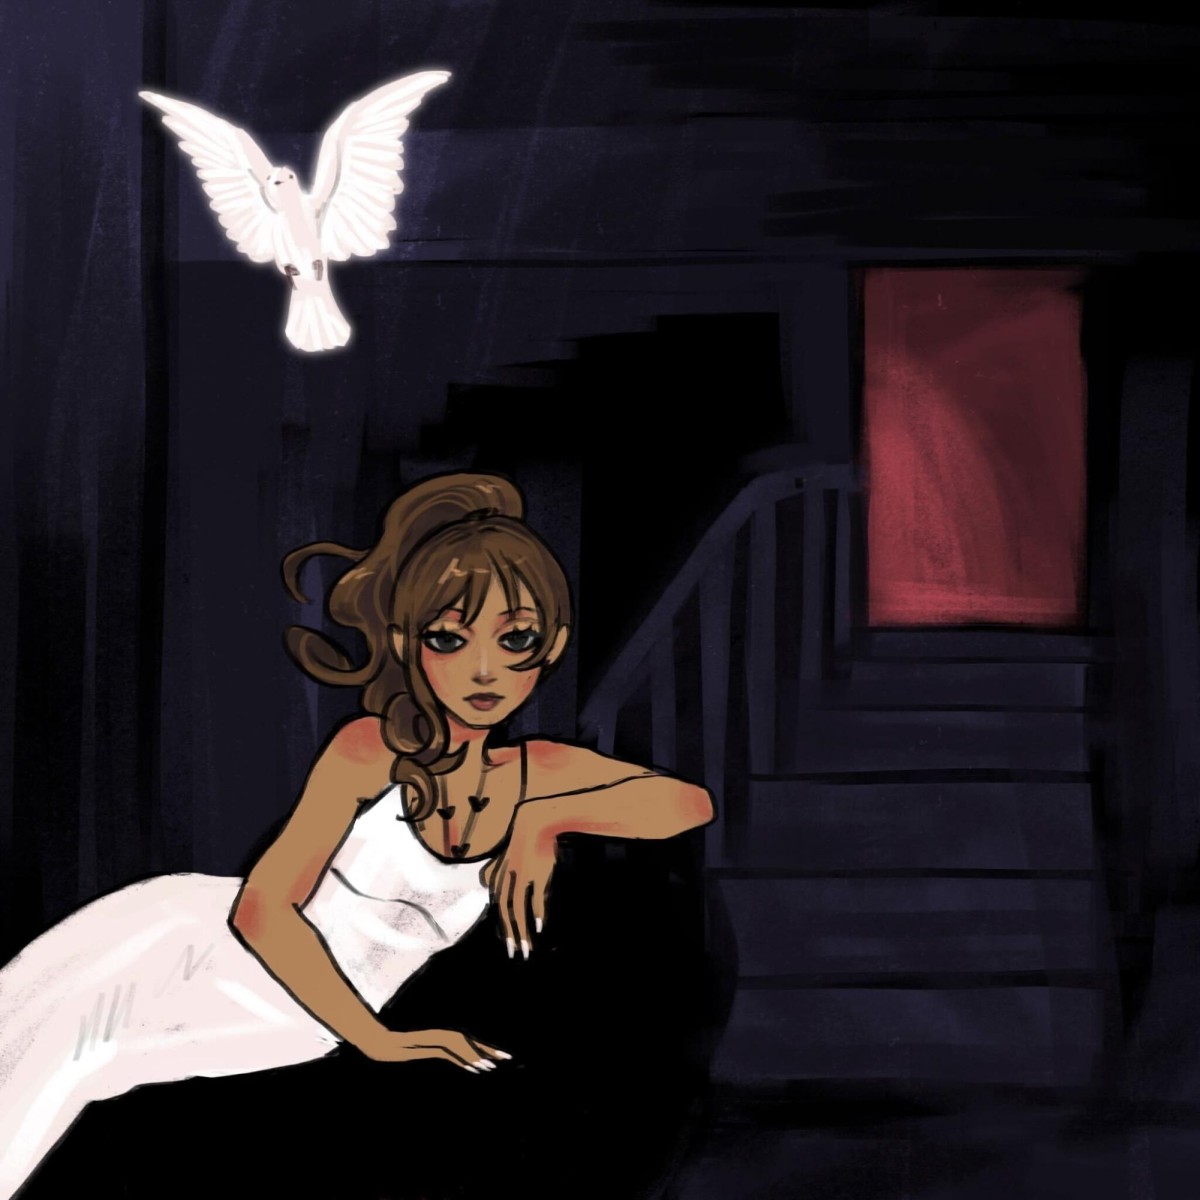 An illustration of a girl wearing a white dress with brown hair is sitting on a black chair. She is outside a building in front of stairs, and red light is coming out of the entrance door. A white dove is flying.